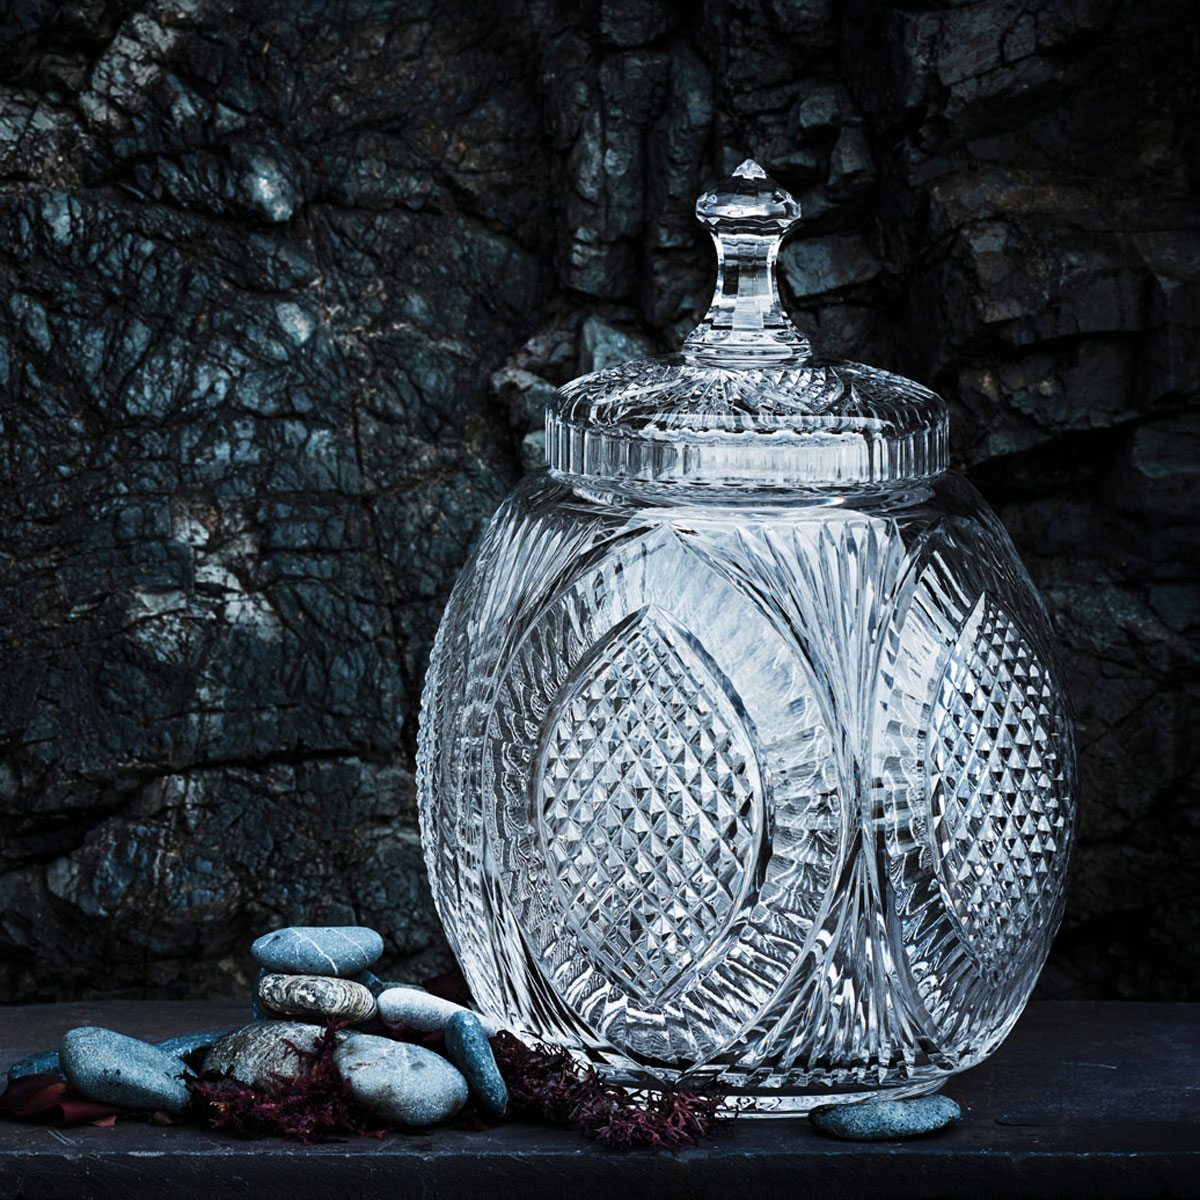 Waterford Crystal, House of Waterford Reflections Cookie Jar, Limited Edition of 100